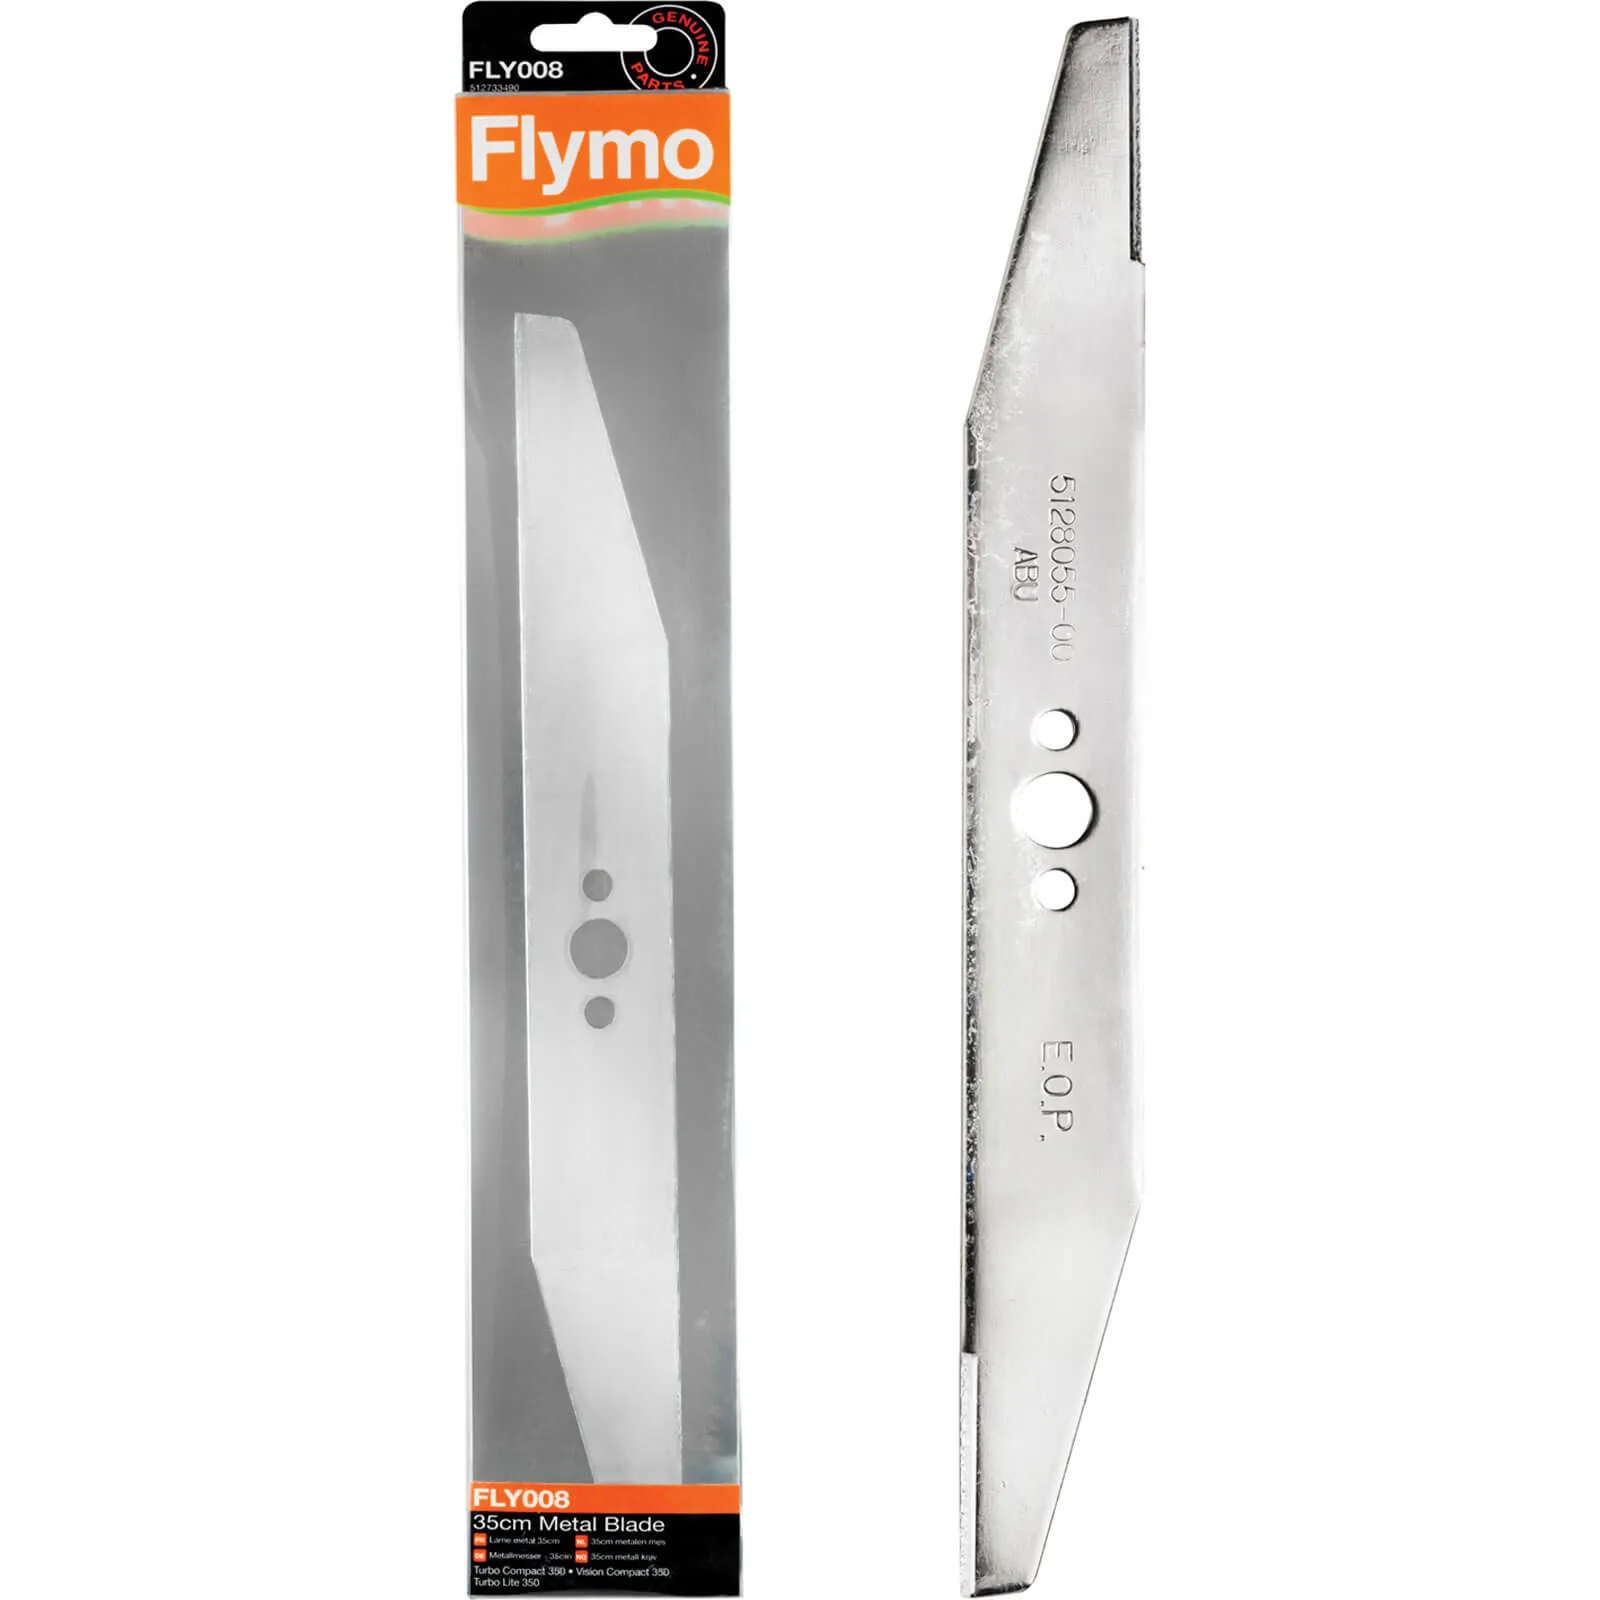 Flymo FLY008 Genuine Blade for TC350, TCV350, TL350 and VC350PLUS Lawnmowers - 350mm, Pack of 1